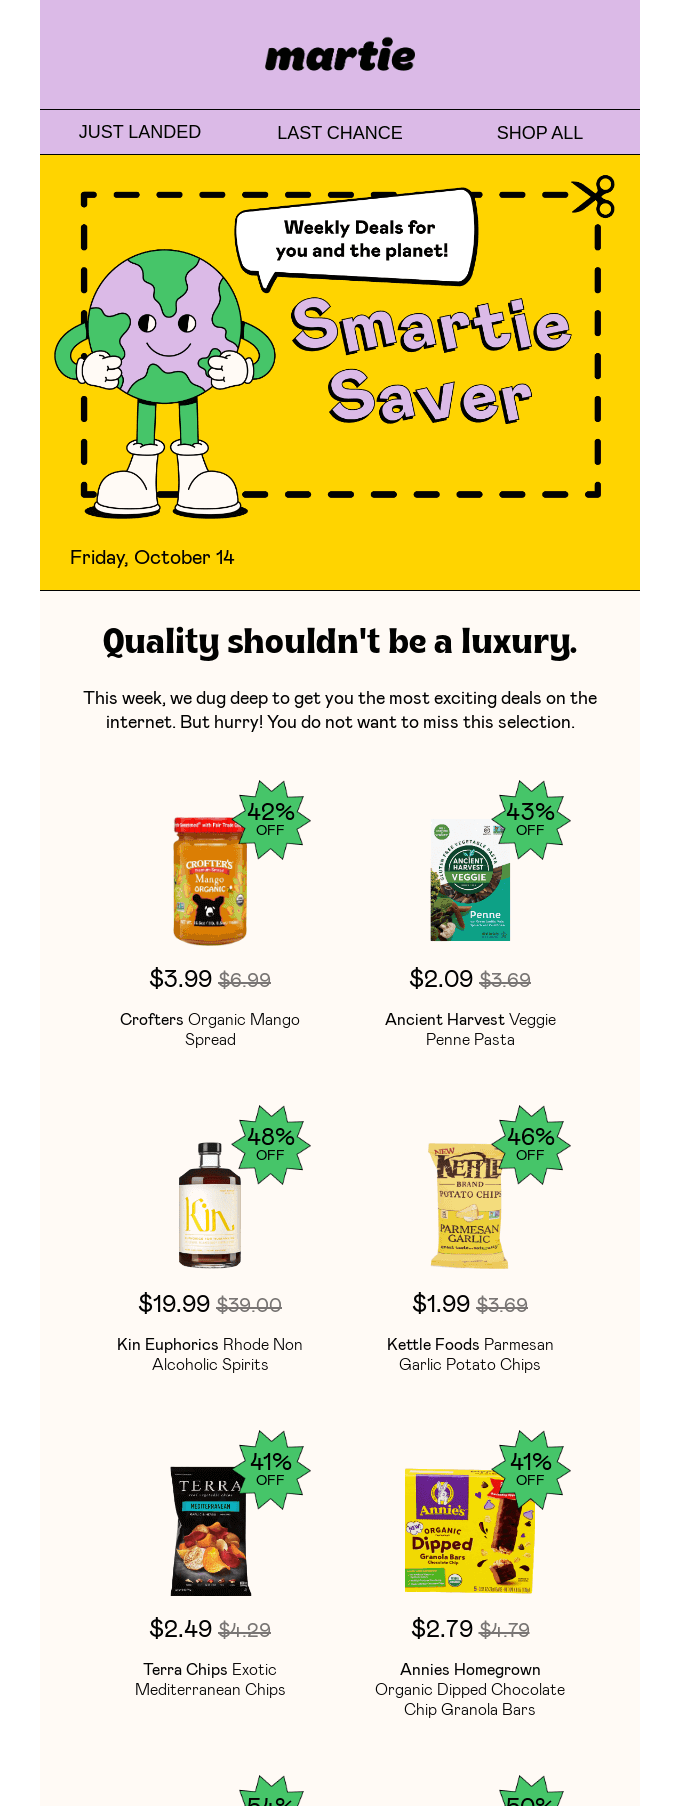 Email design for a food brand featuring a bright color scheme